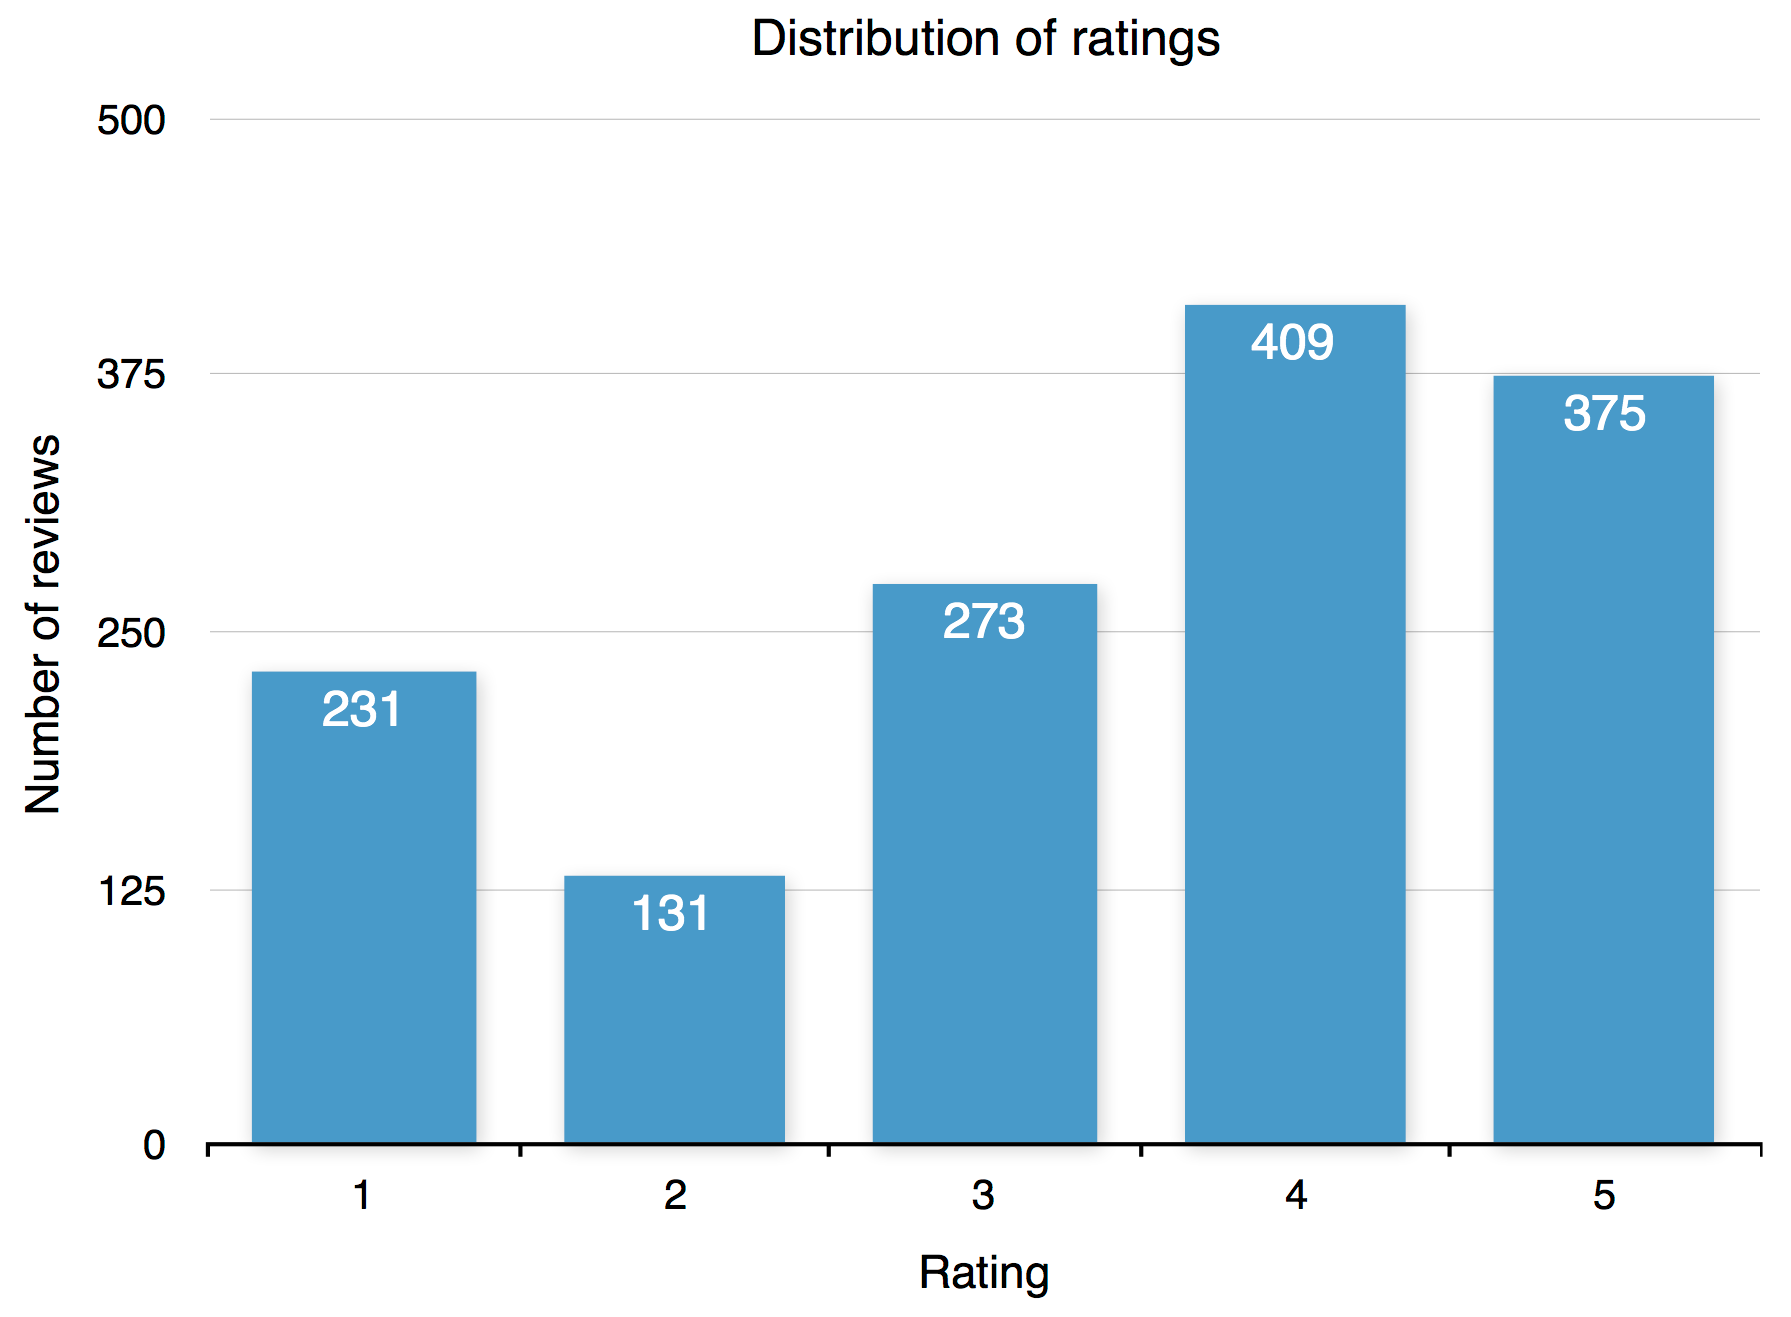 The distribution of reviews across ratings.